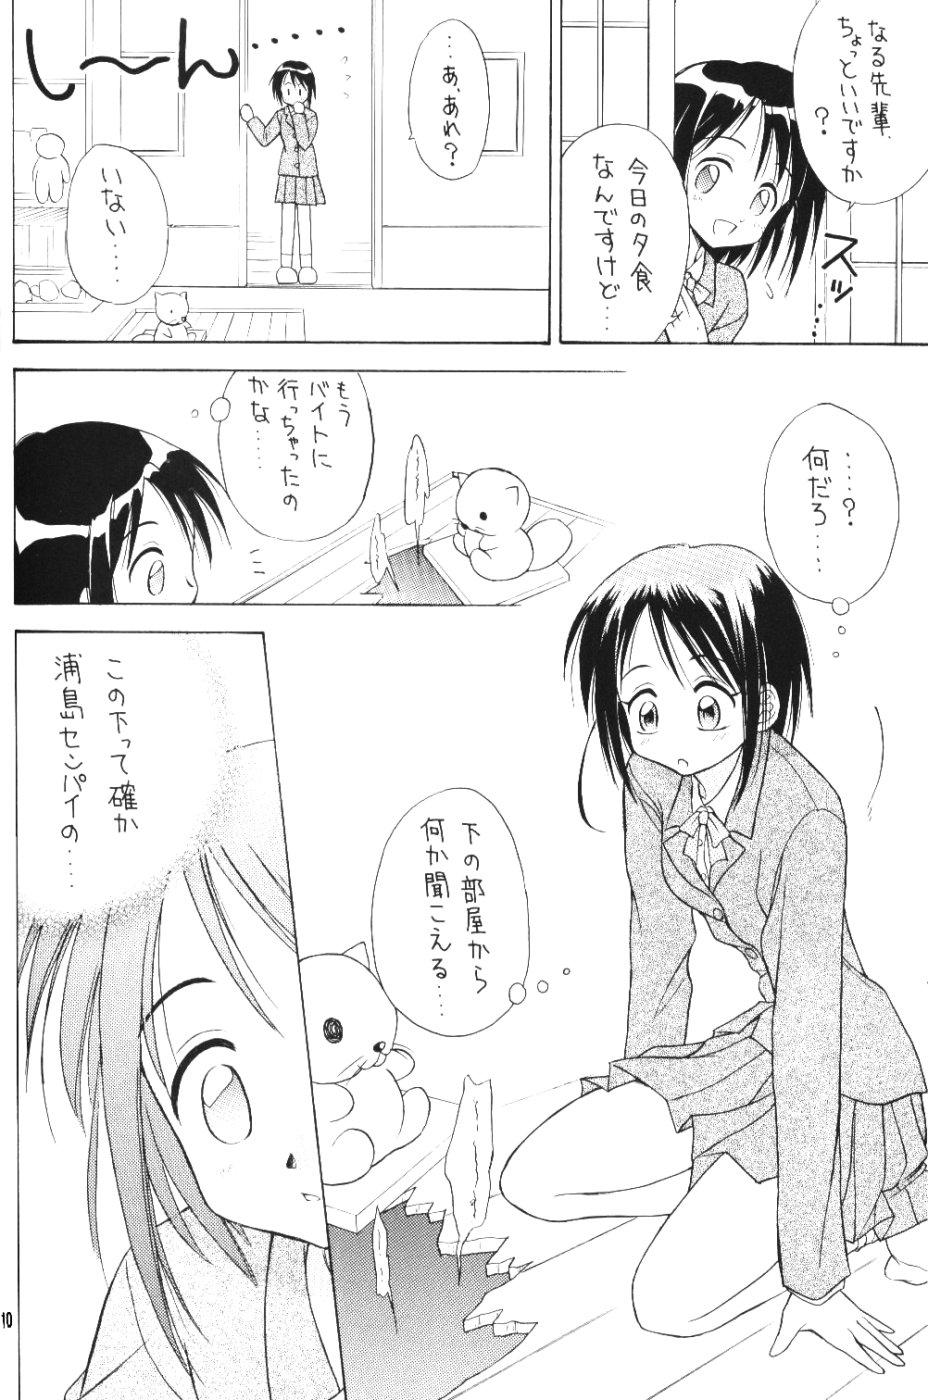 Sislovesme Lovely 4 - Love hina Russia - Page 9